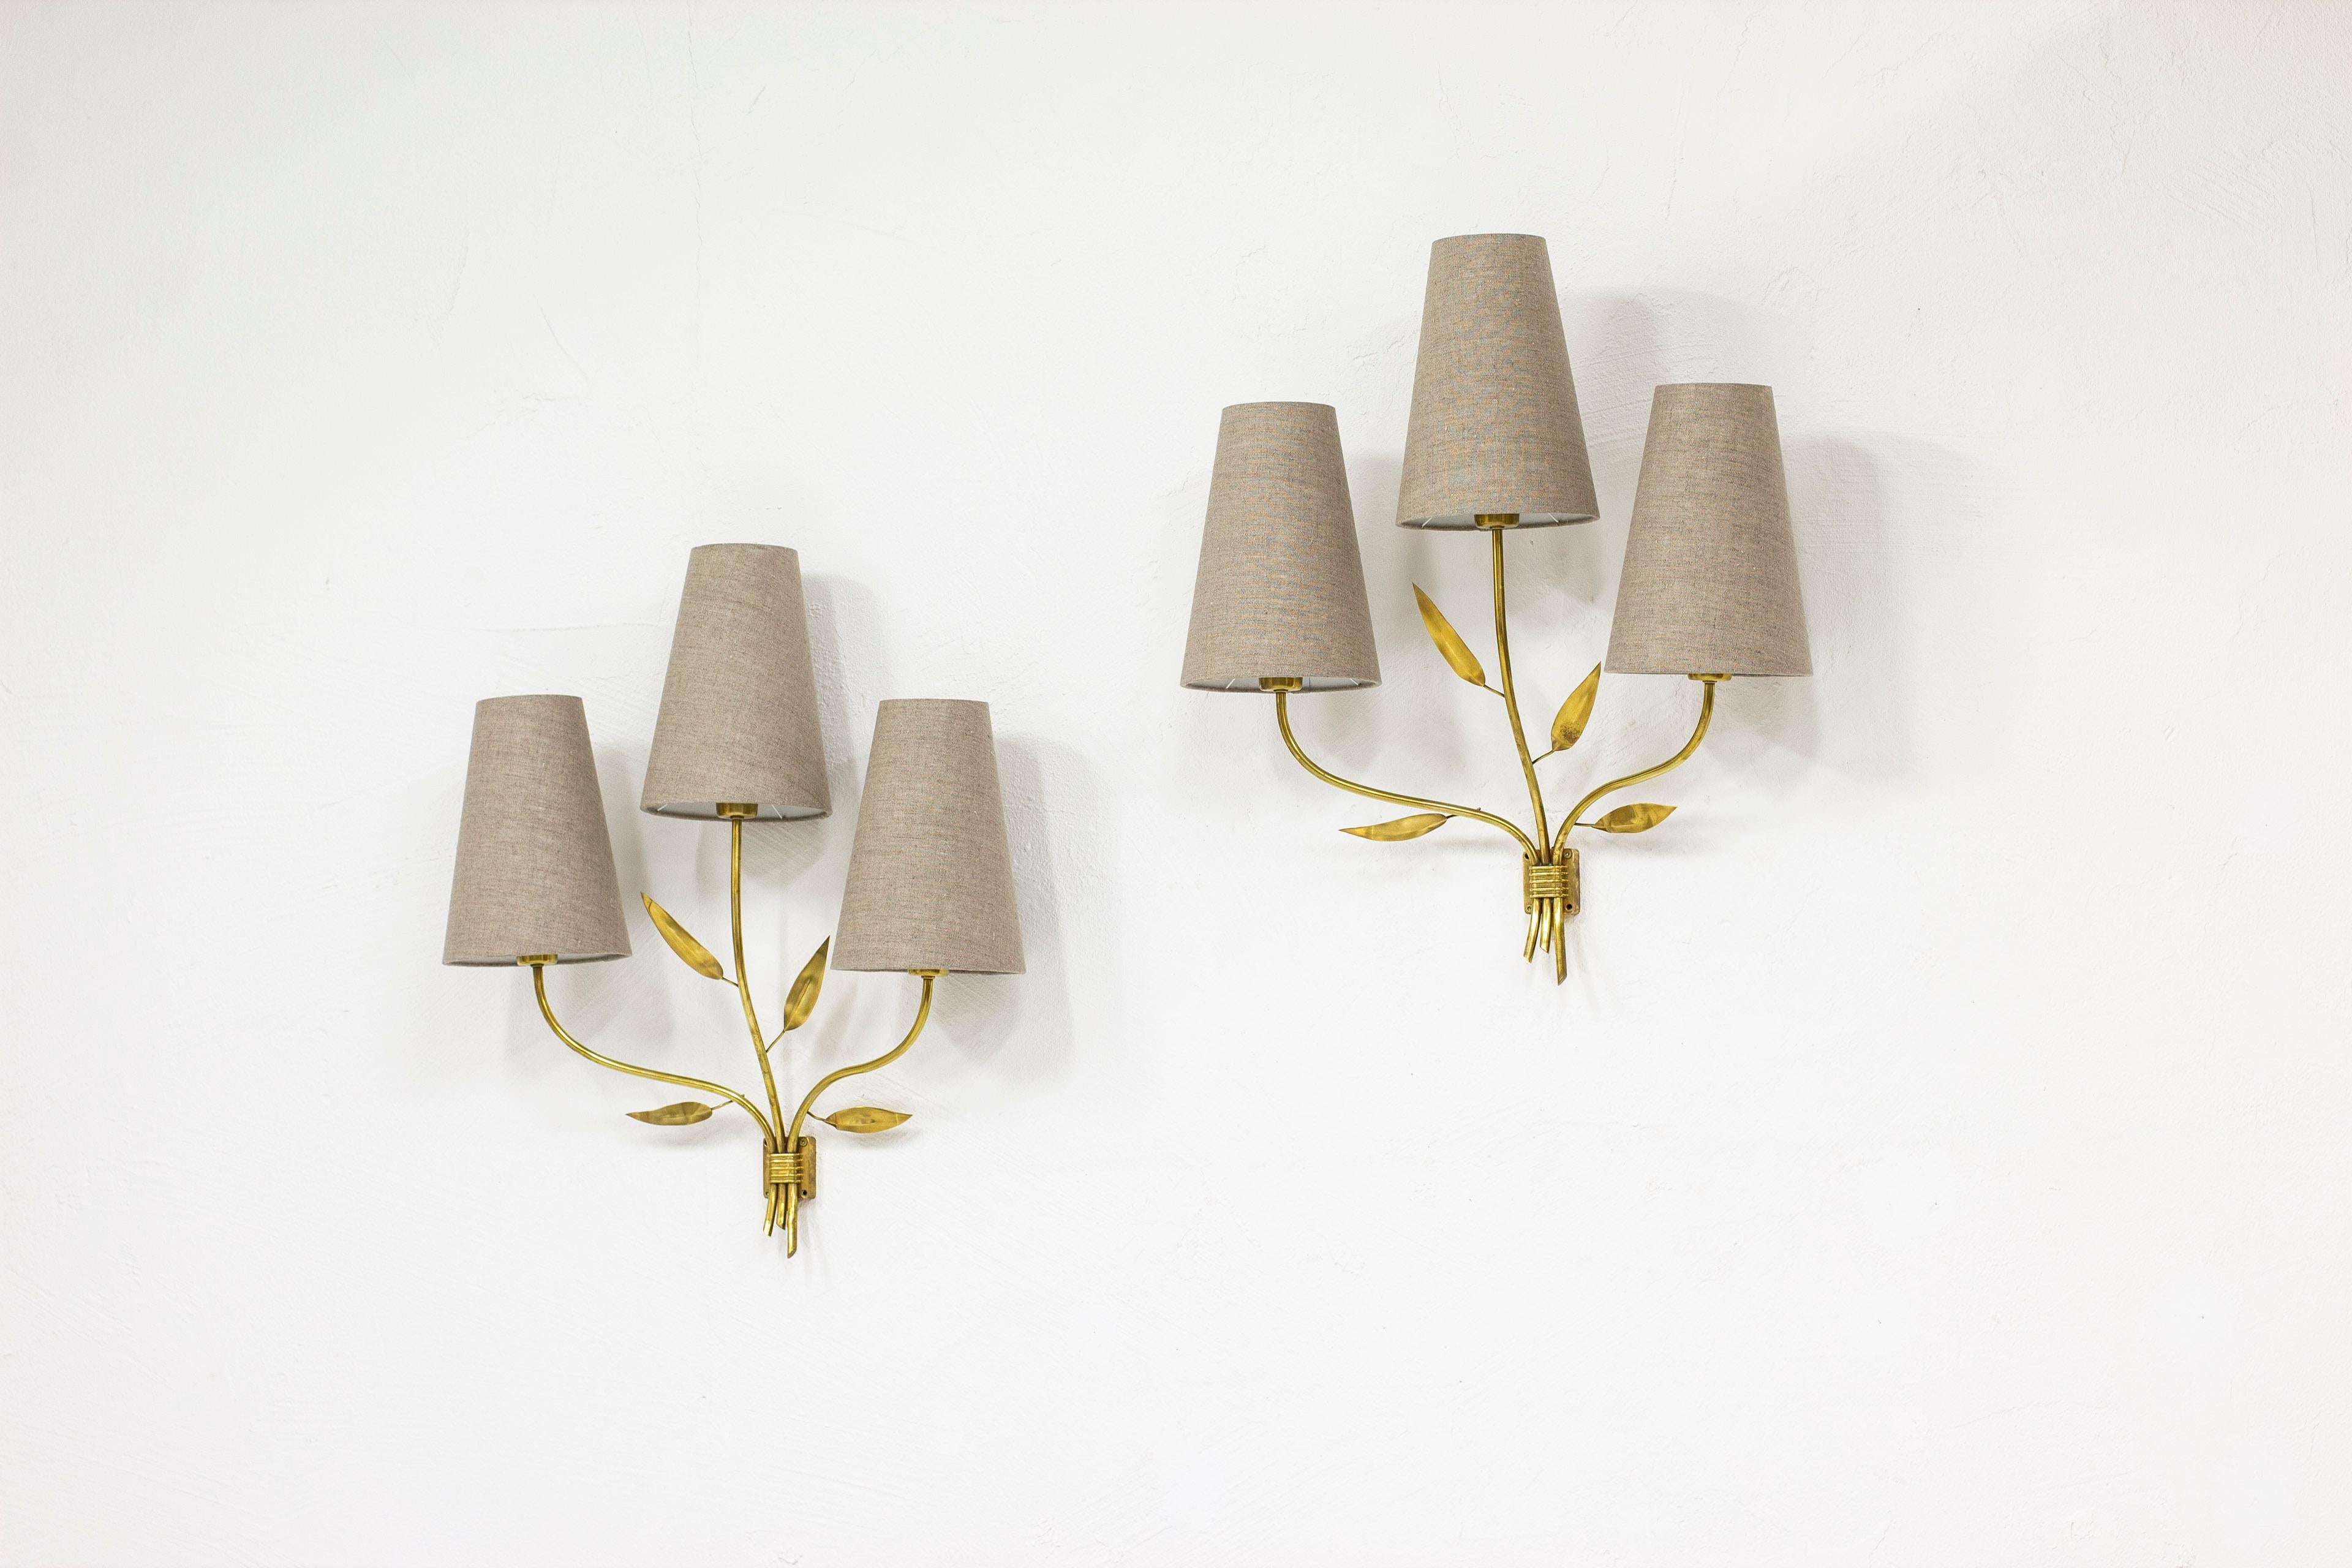 Pair of large Swedish modern wall lamps. Designed and Produced in Sweden during the 1940s. Three organic arms with stylized leaves in brass. Most likely made on commission. New lamps shades in natural/grey linnen fabric. can be adjusted for either